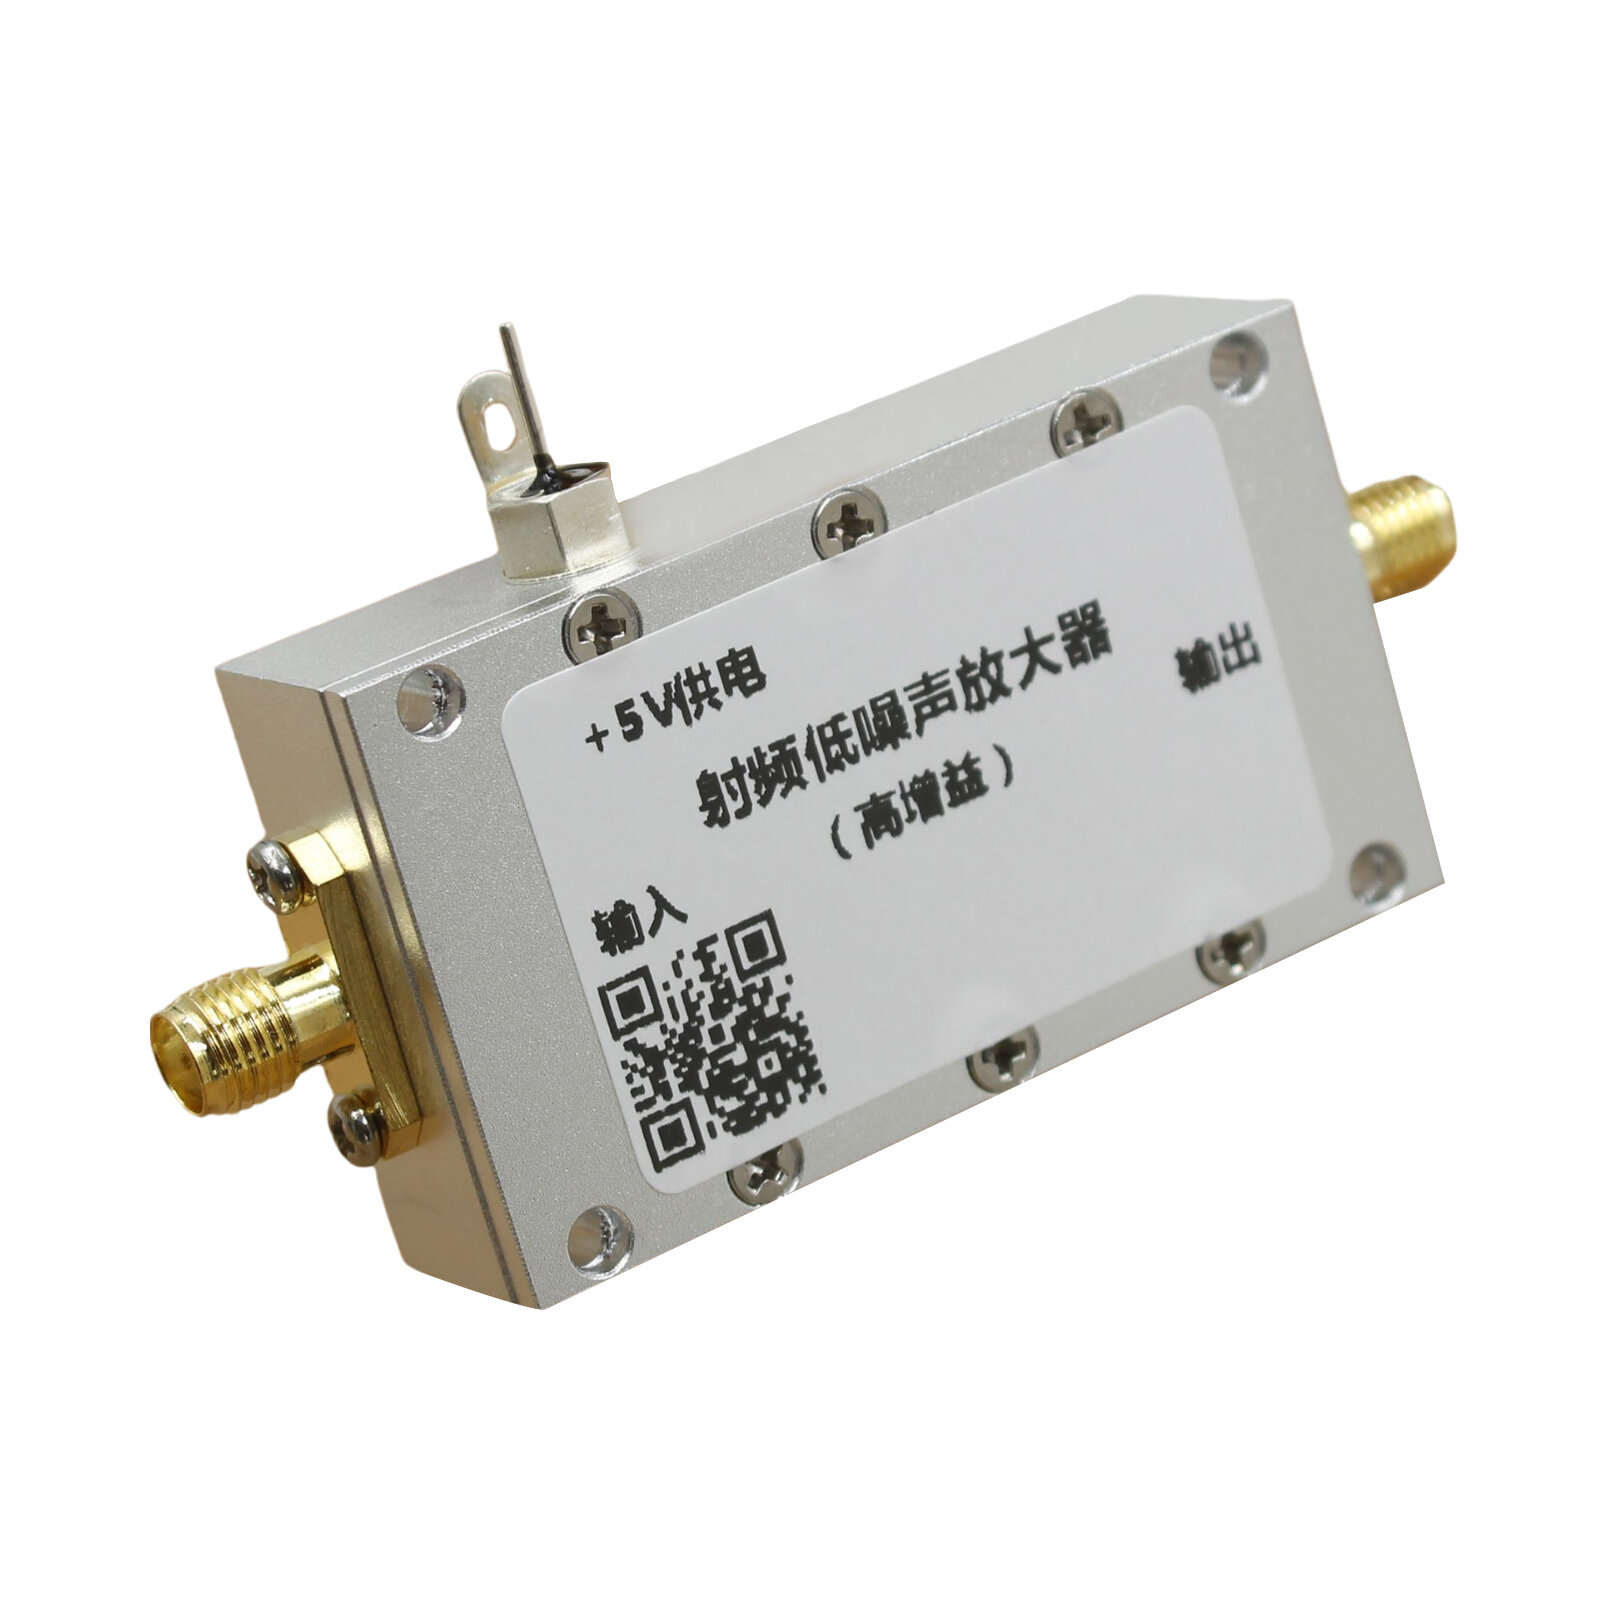 

Low Noise Amplifier Module for Broadband Receiver Systems 0.01-4GHz Operating Frequency High Gain Low Power Consumption